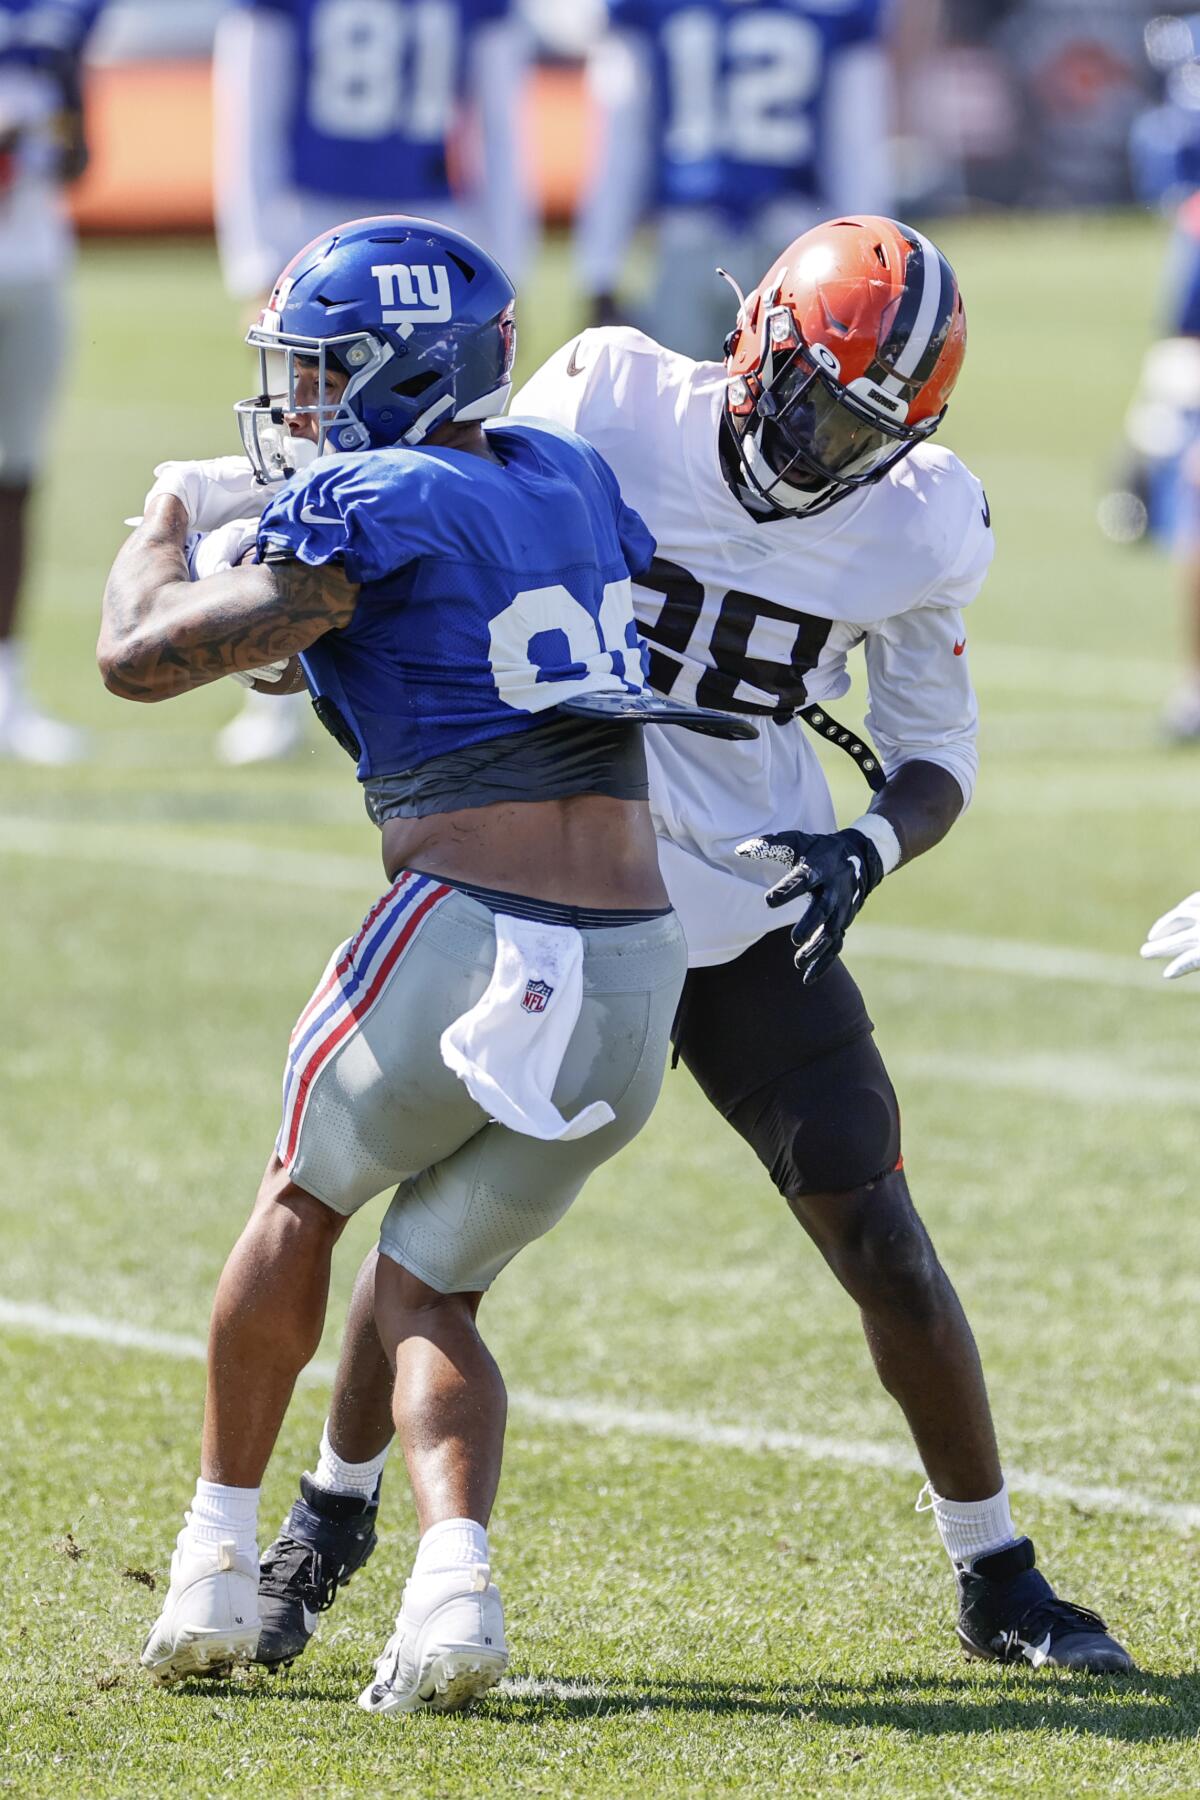 Cleveland Browns linebacker Jeremiah Owusu-Koramoah (28) stops New York Giants tight end Evan Engram (88) during a joint NFL football training camp practice Friday, Aug. 20, 2021, in Berea, Ohio. (AP Photo/Ron Schwane)